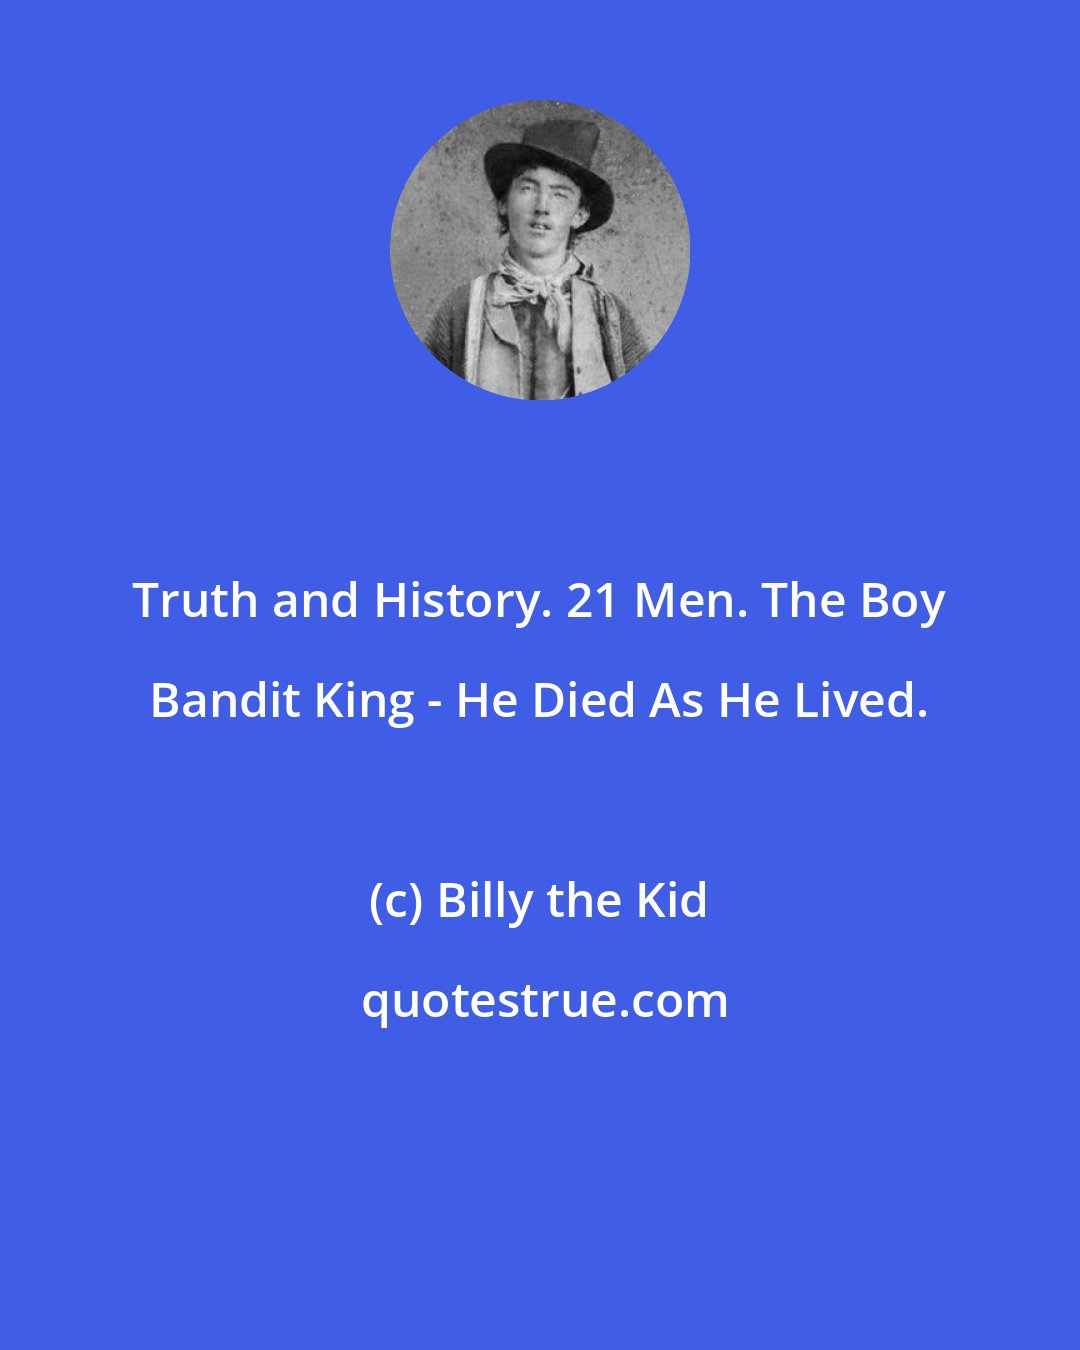 Billy the Kid: Truth and History. 21 Men. The Boy Bandit King - He Died As He Lived.